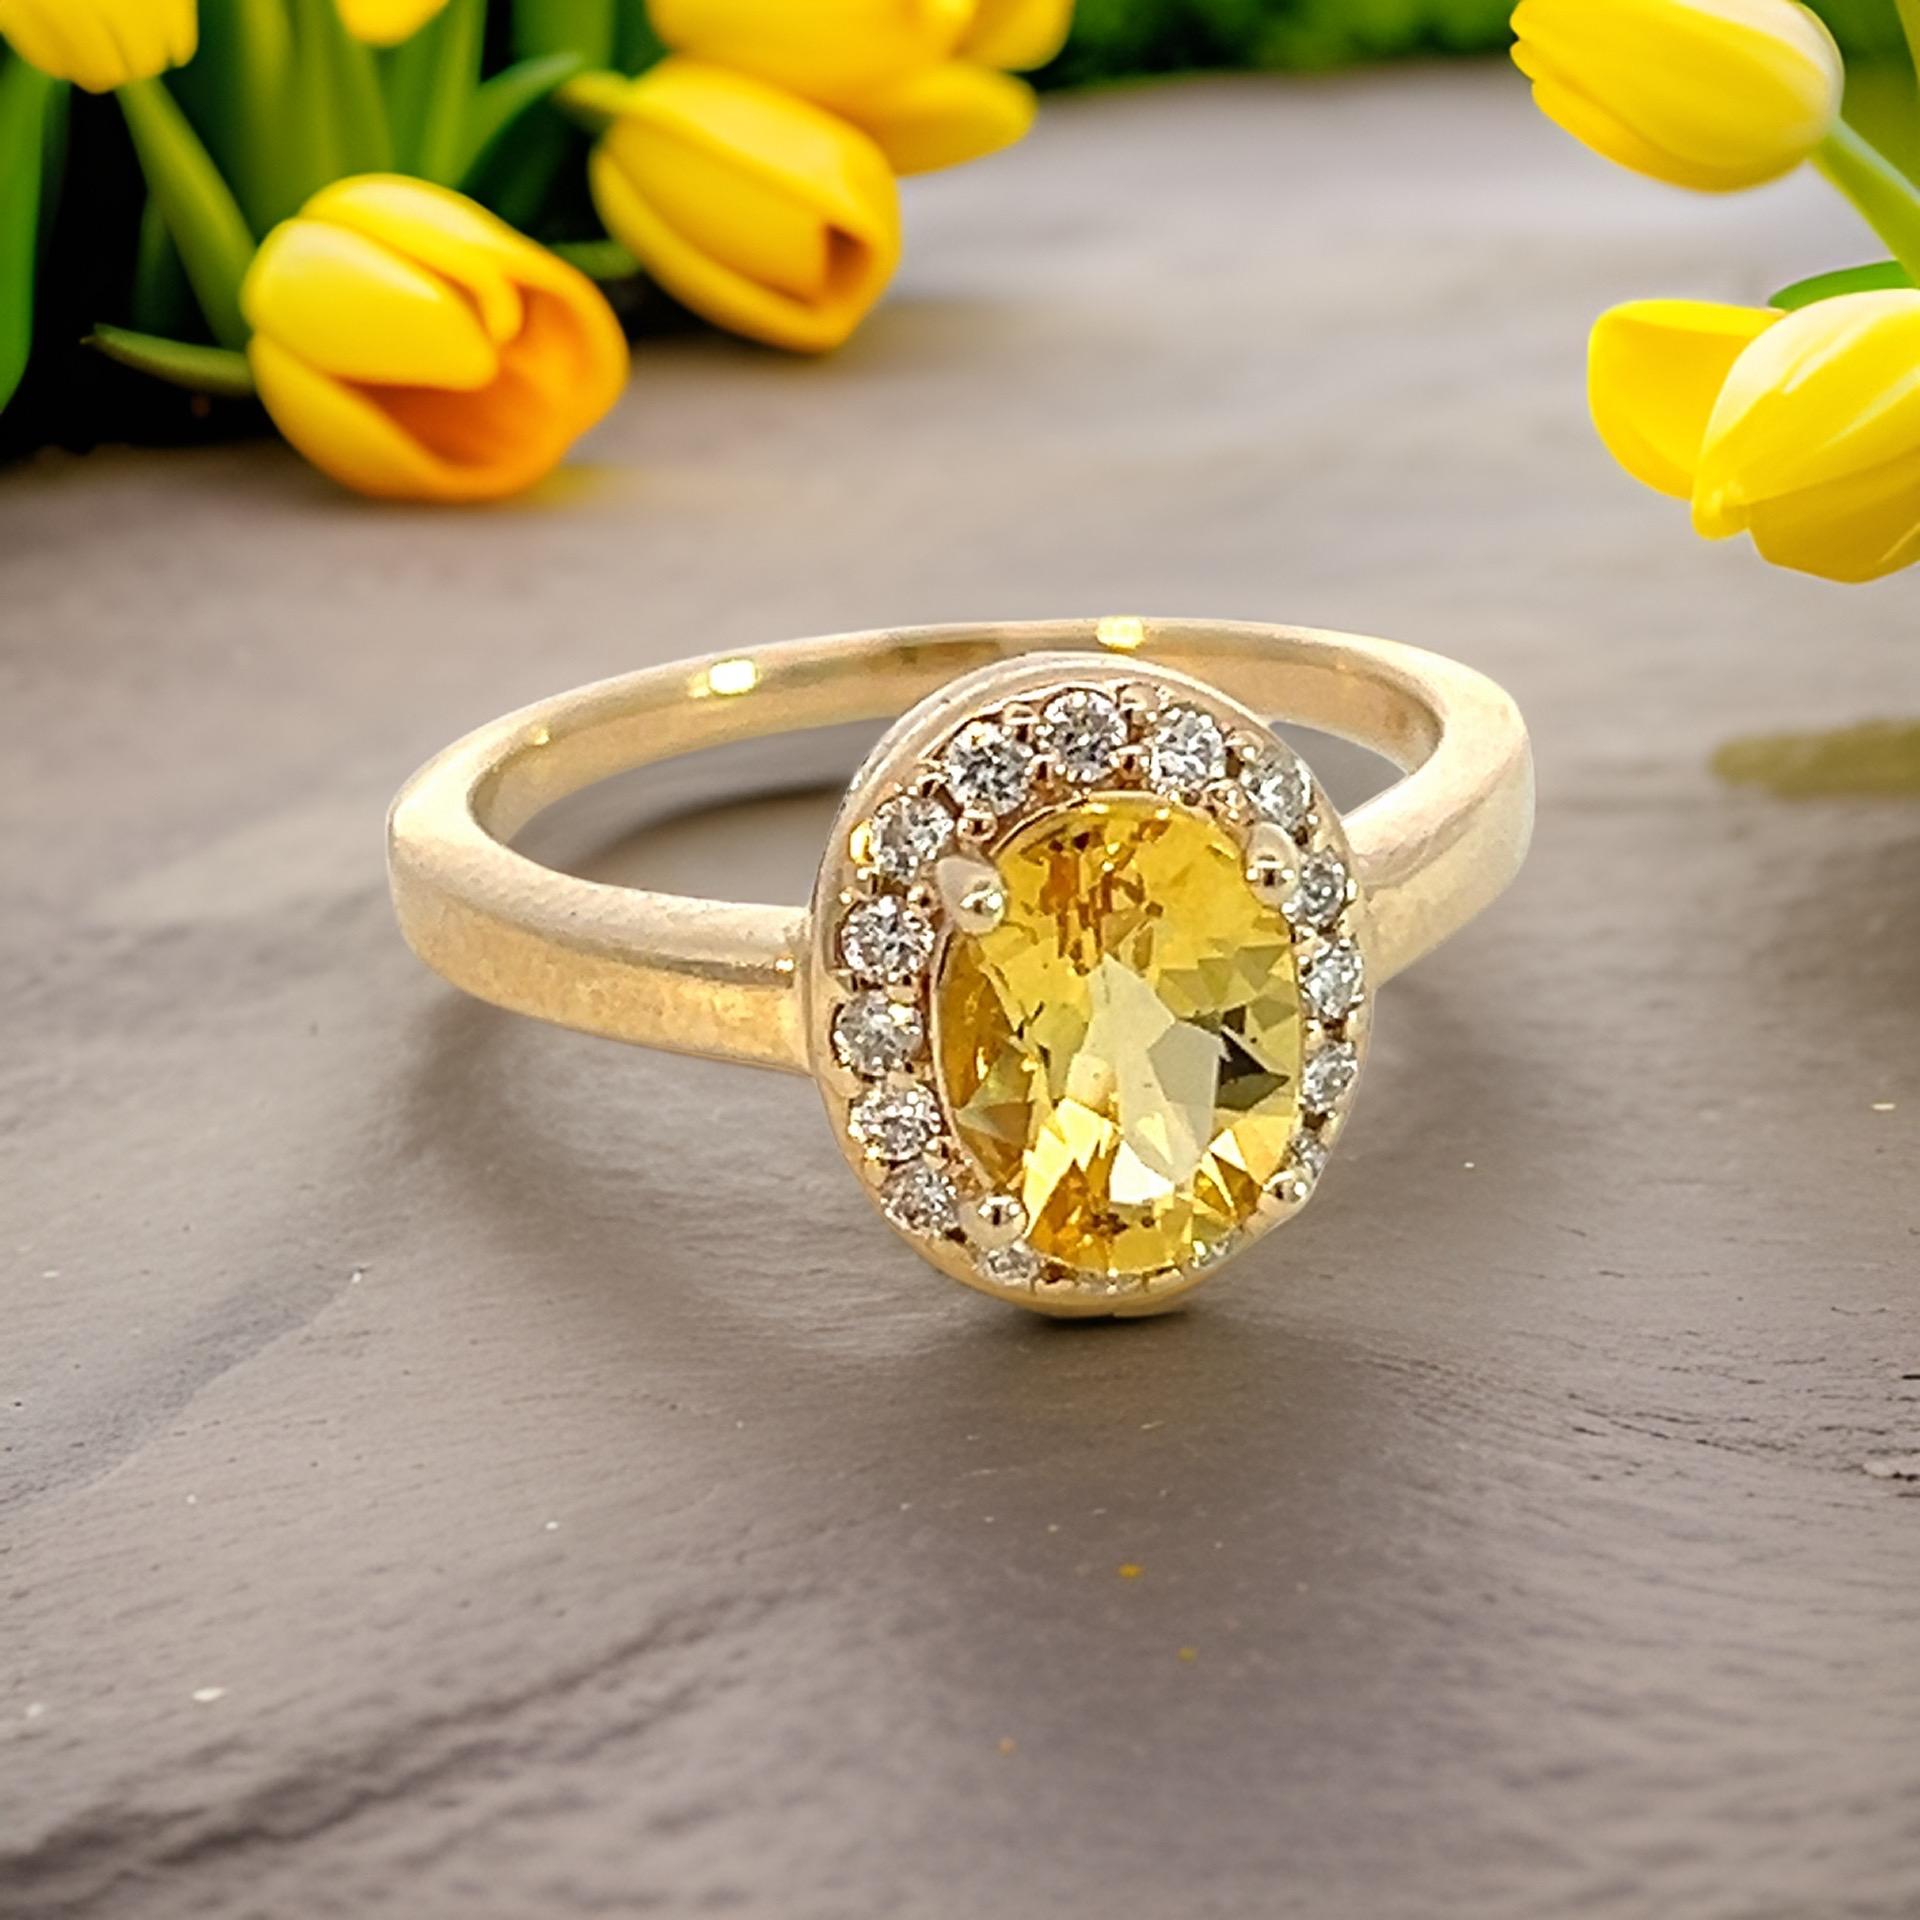 Natural Citrine Diamond Ring 6.5 14k Yellow Gold 1.74 TCW Certified For Sale 1